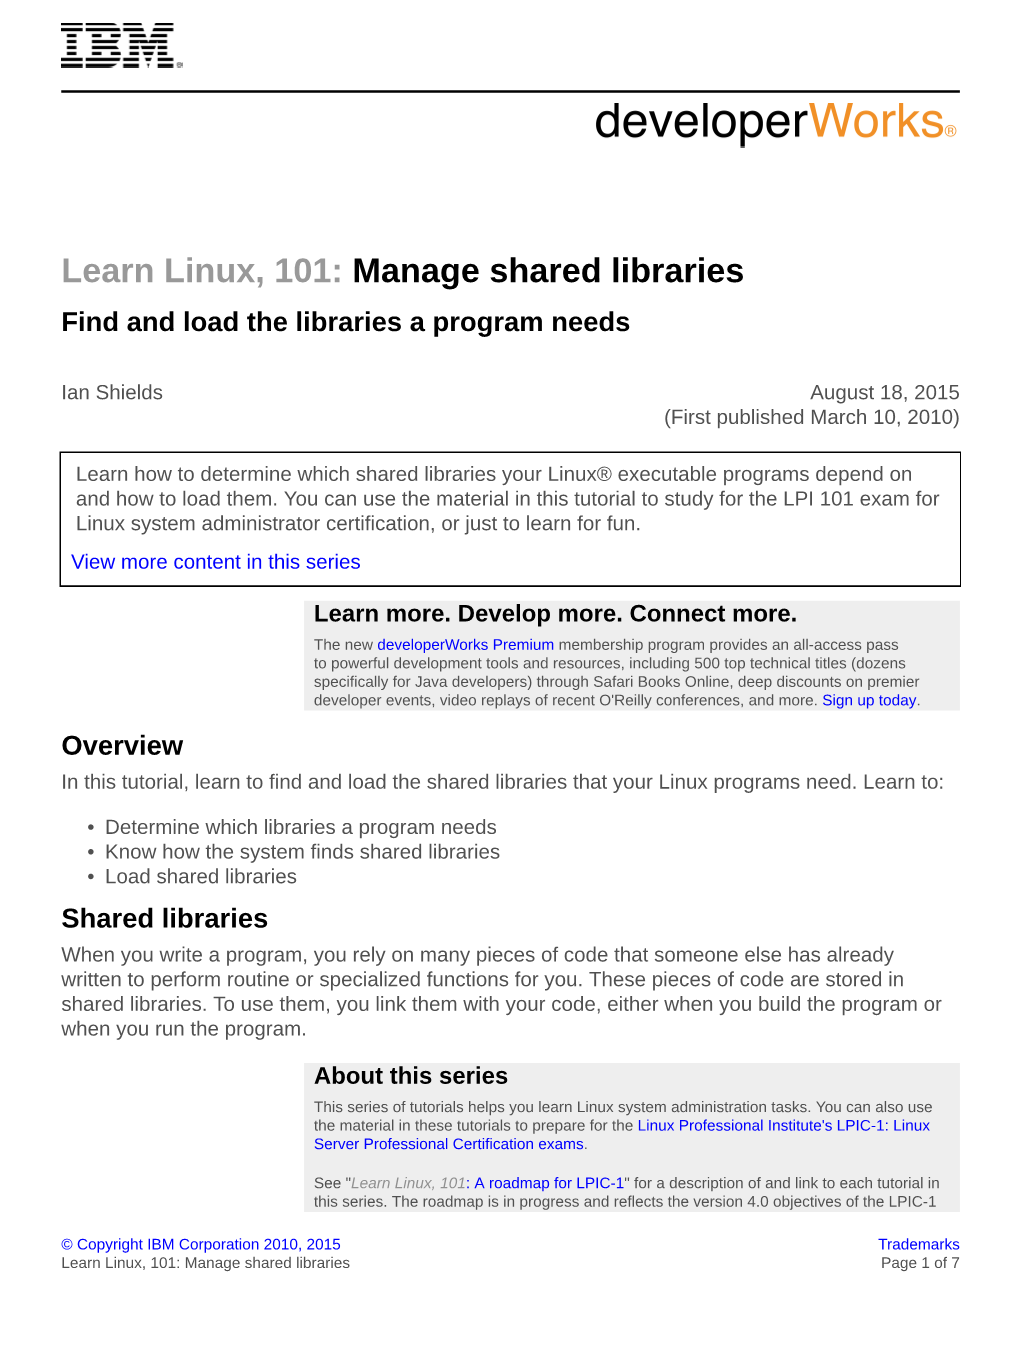 Learn Linux, 101: Manage Shared Libraries Find and Load the Libraries a Program Needs